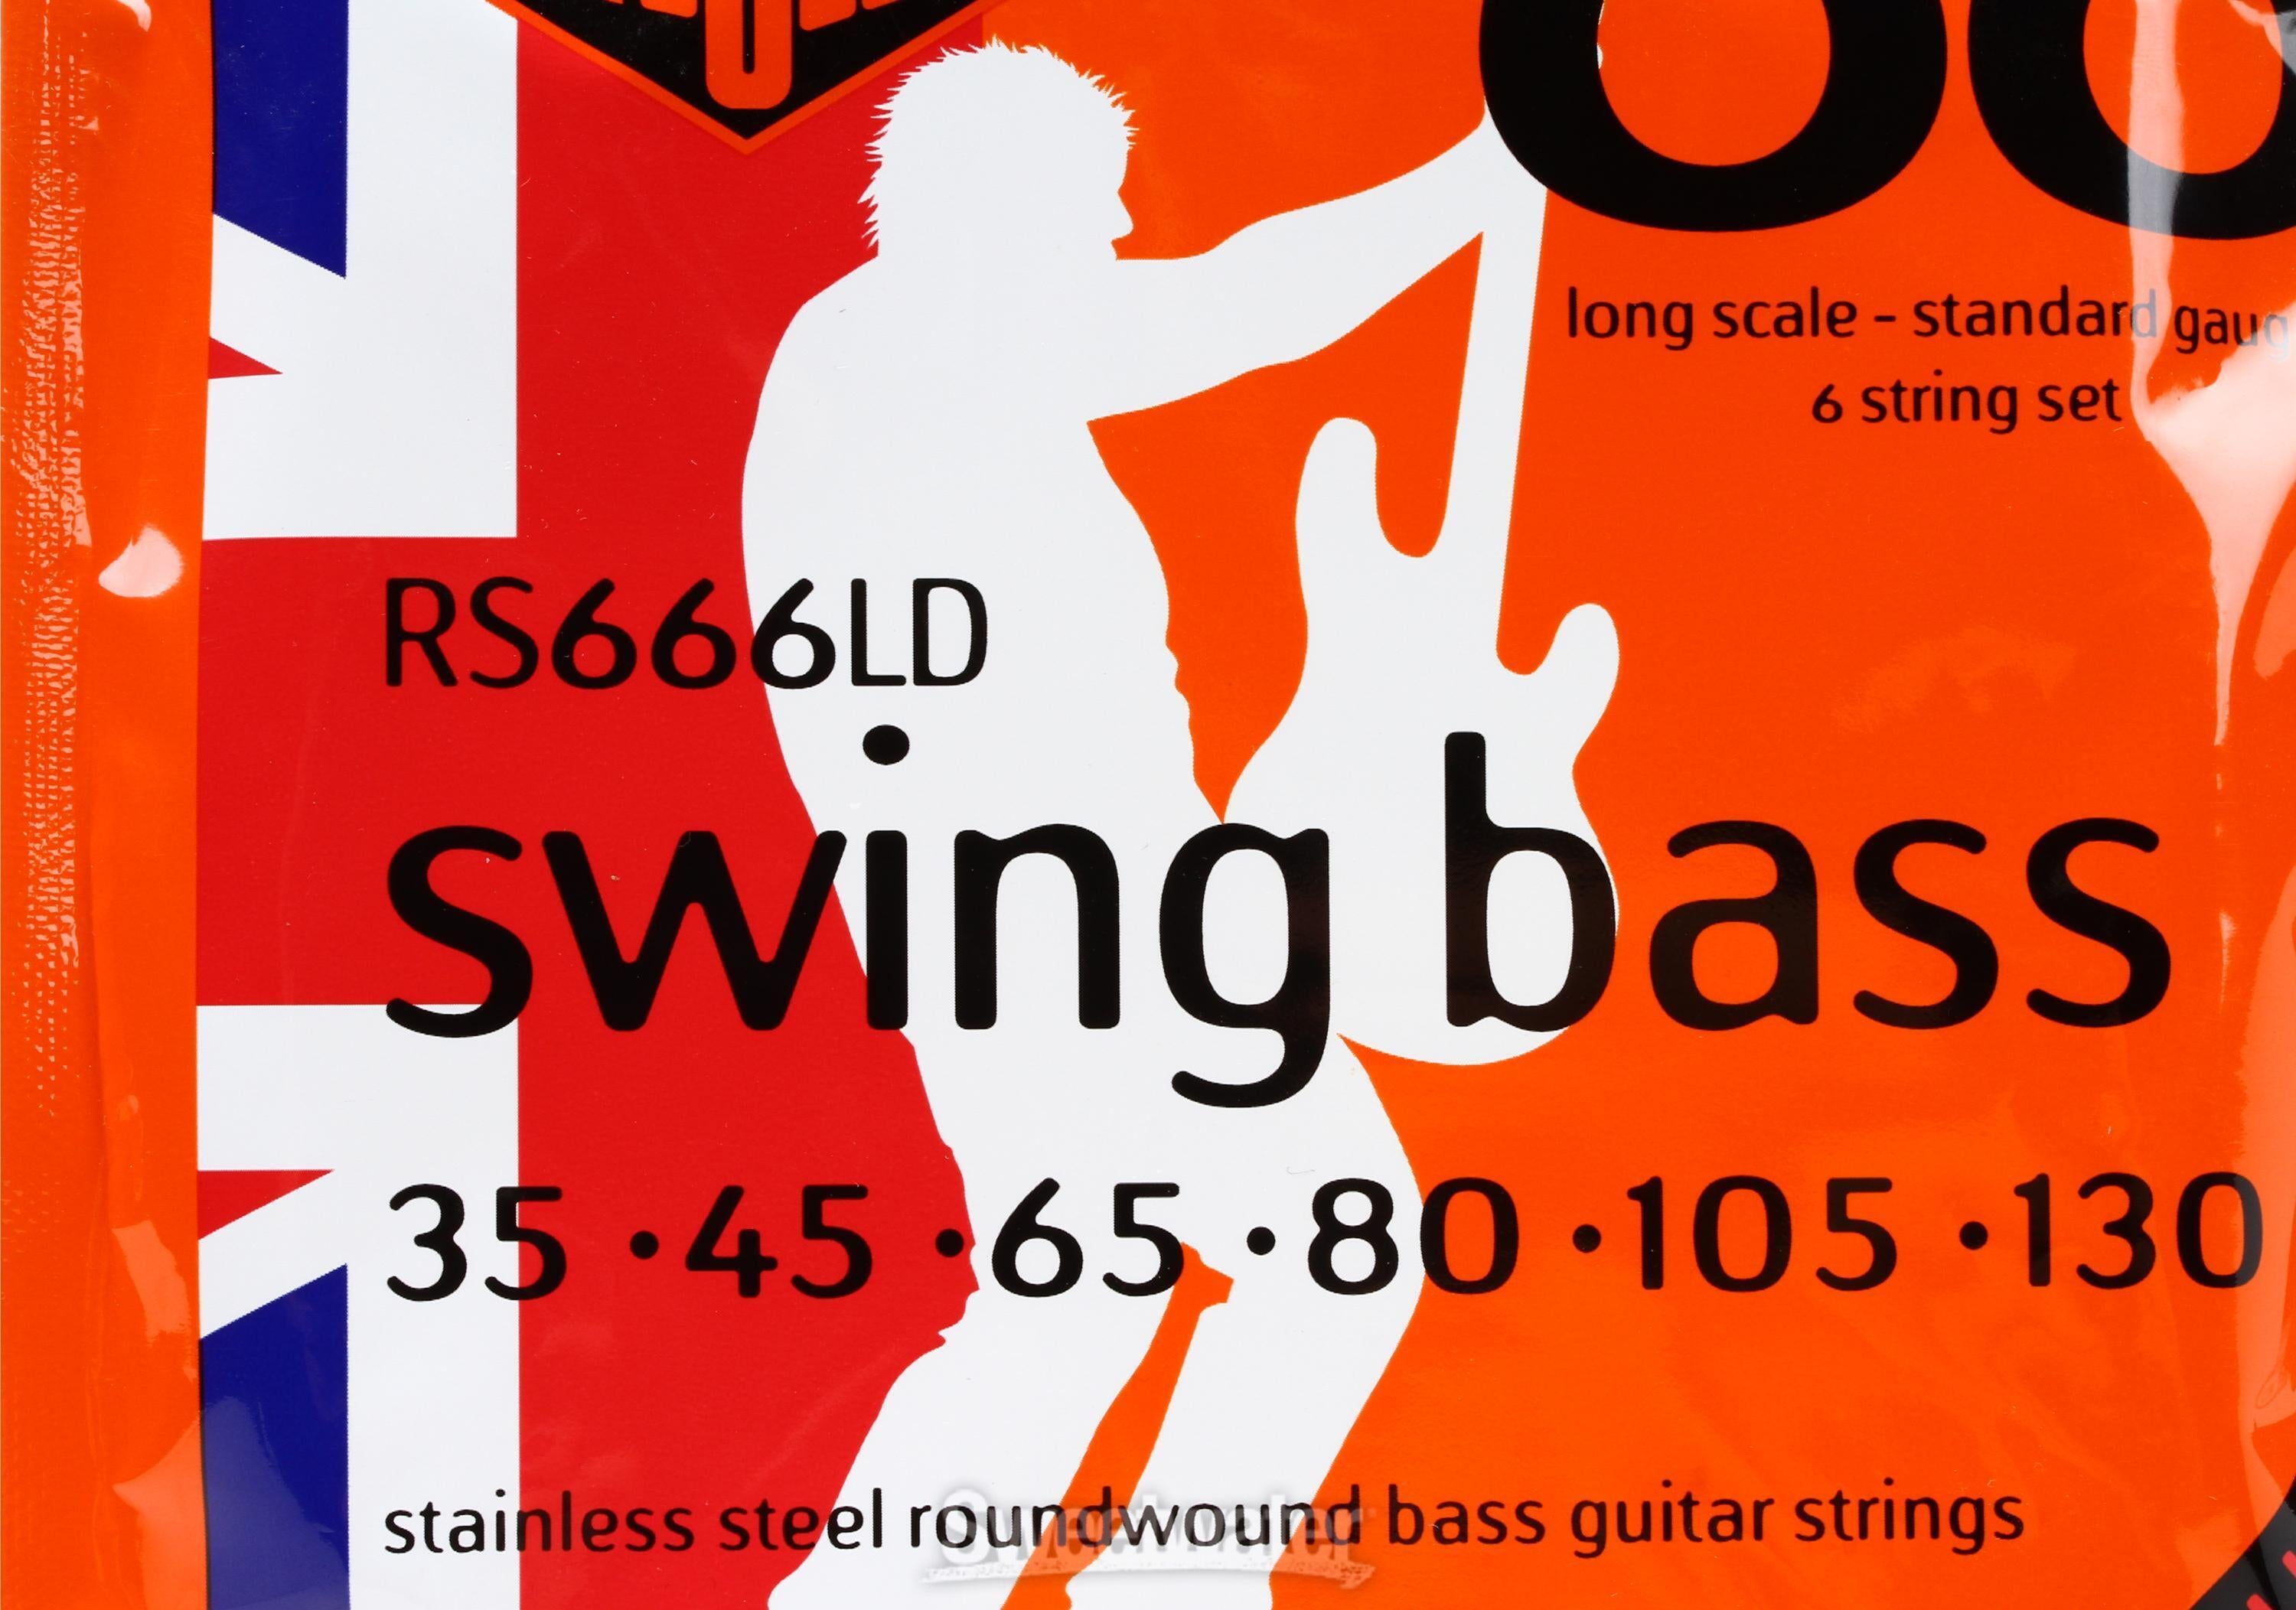 Rotosound RS666LD Swing Bass 66 Stainless Steel Roundwound Bass